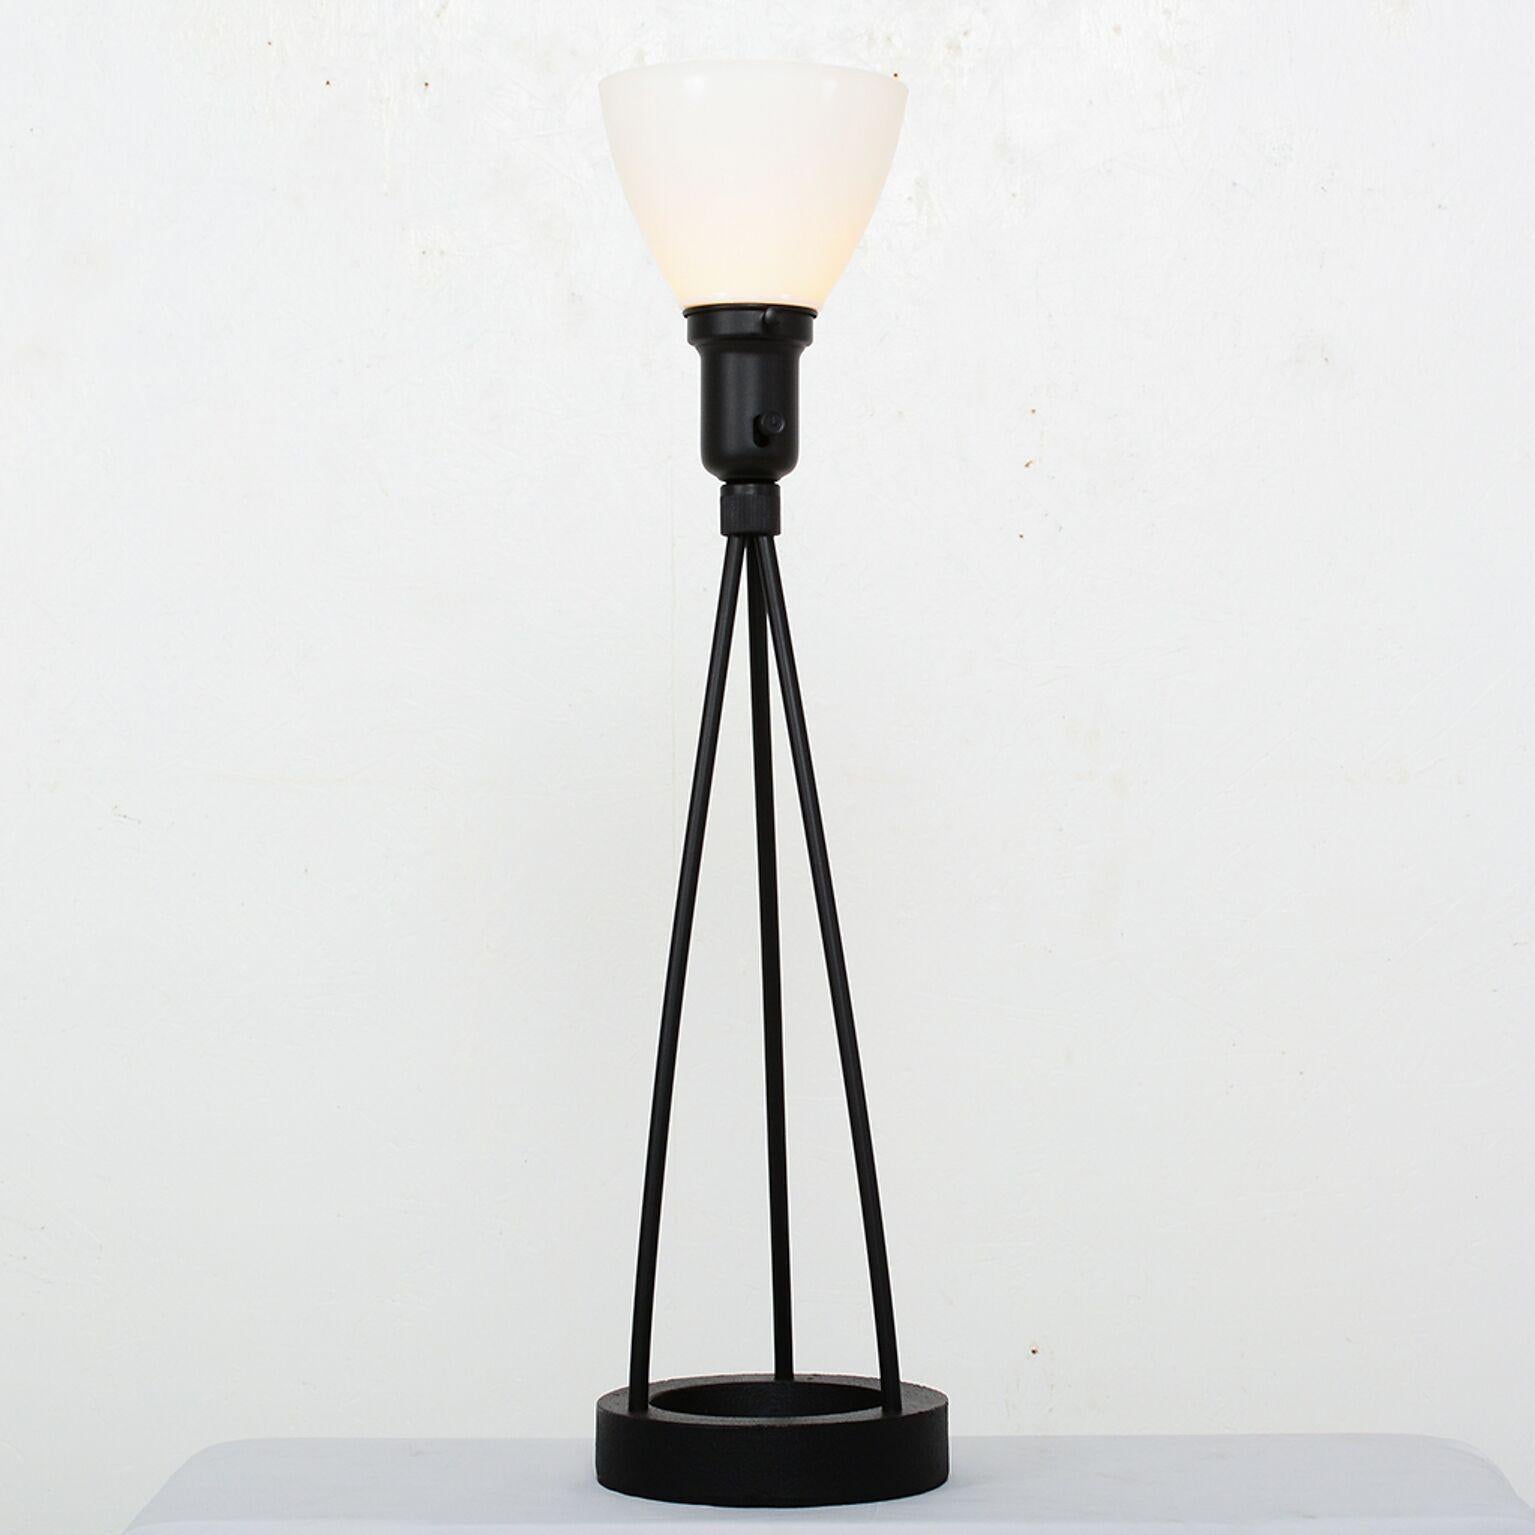 For your pleasure: Tripod metal table lamp with glass shade by Robert Bulmore for Lightolier, circa 1960s.
Dimensions: Height 27